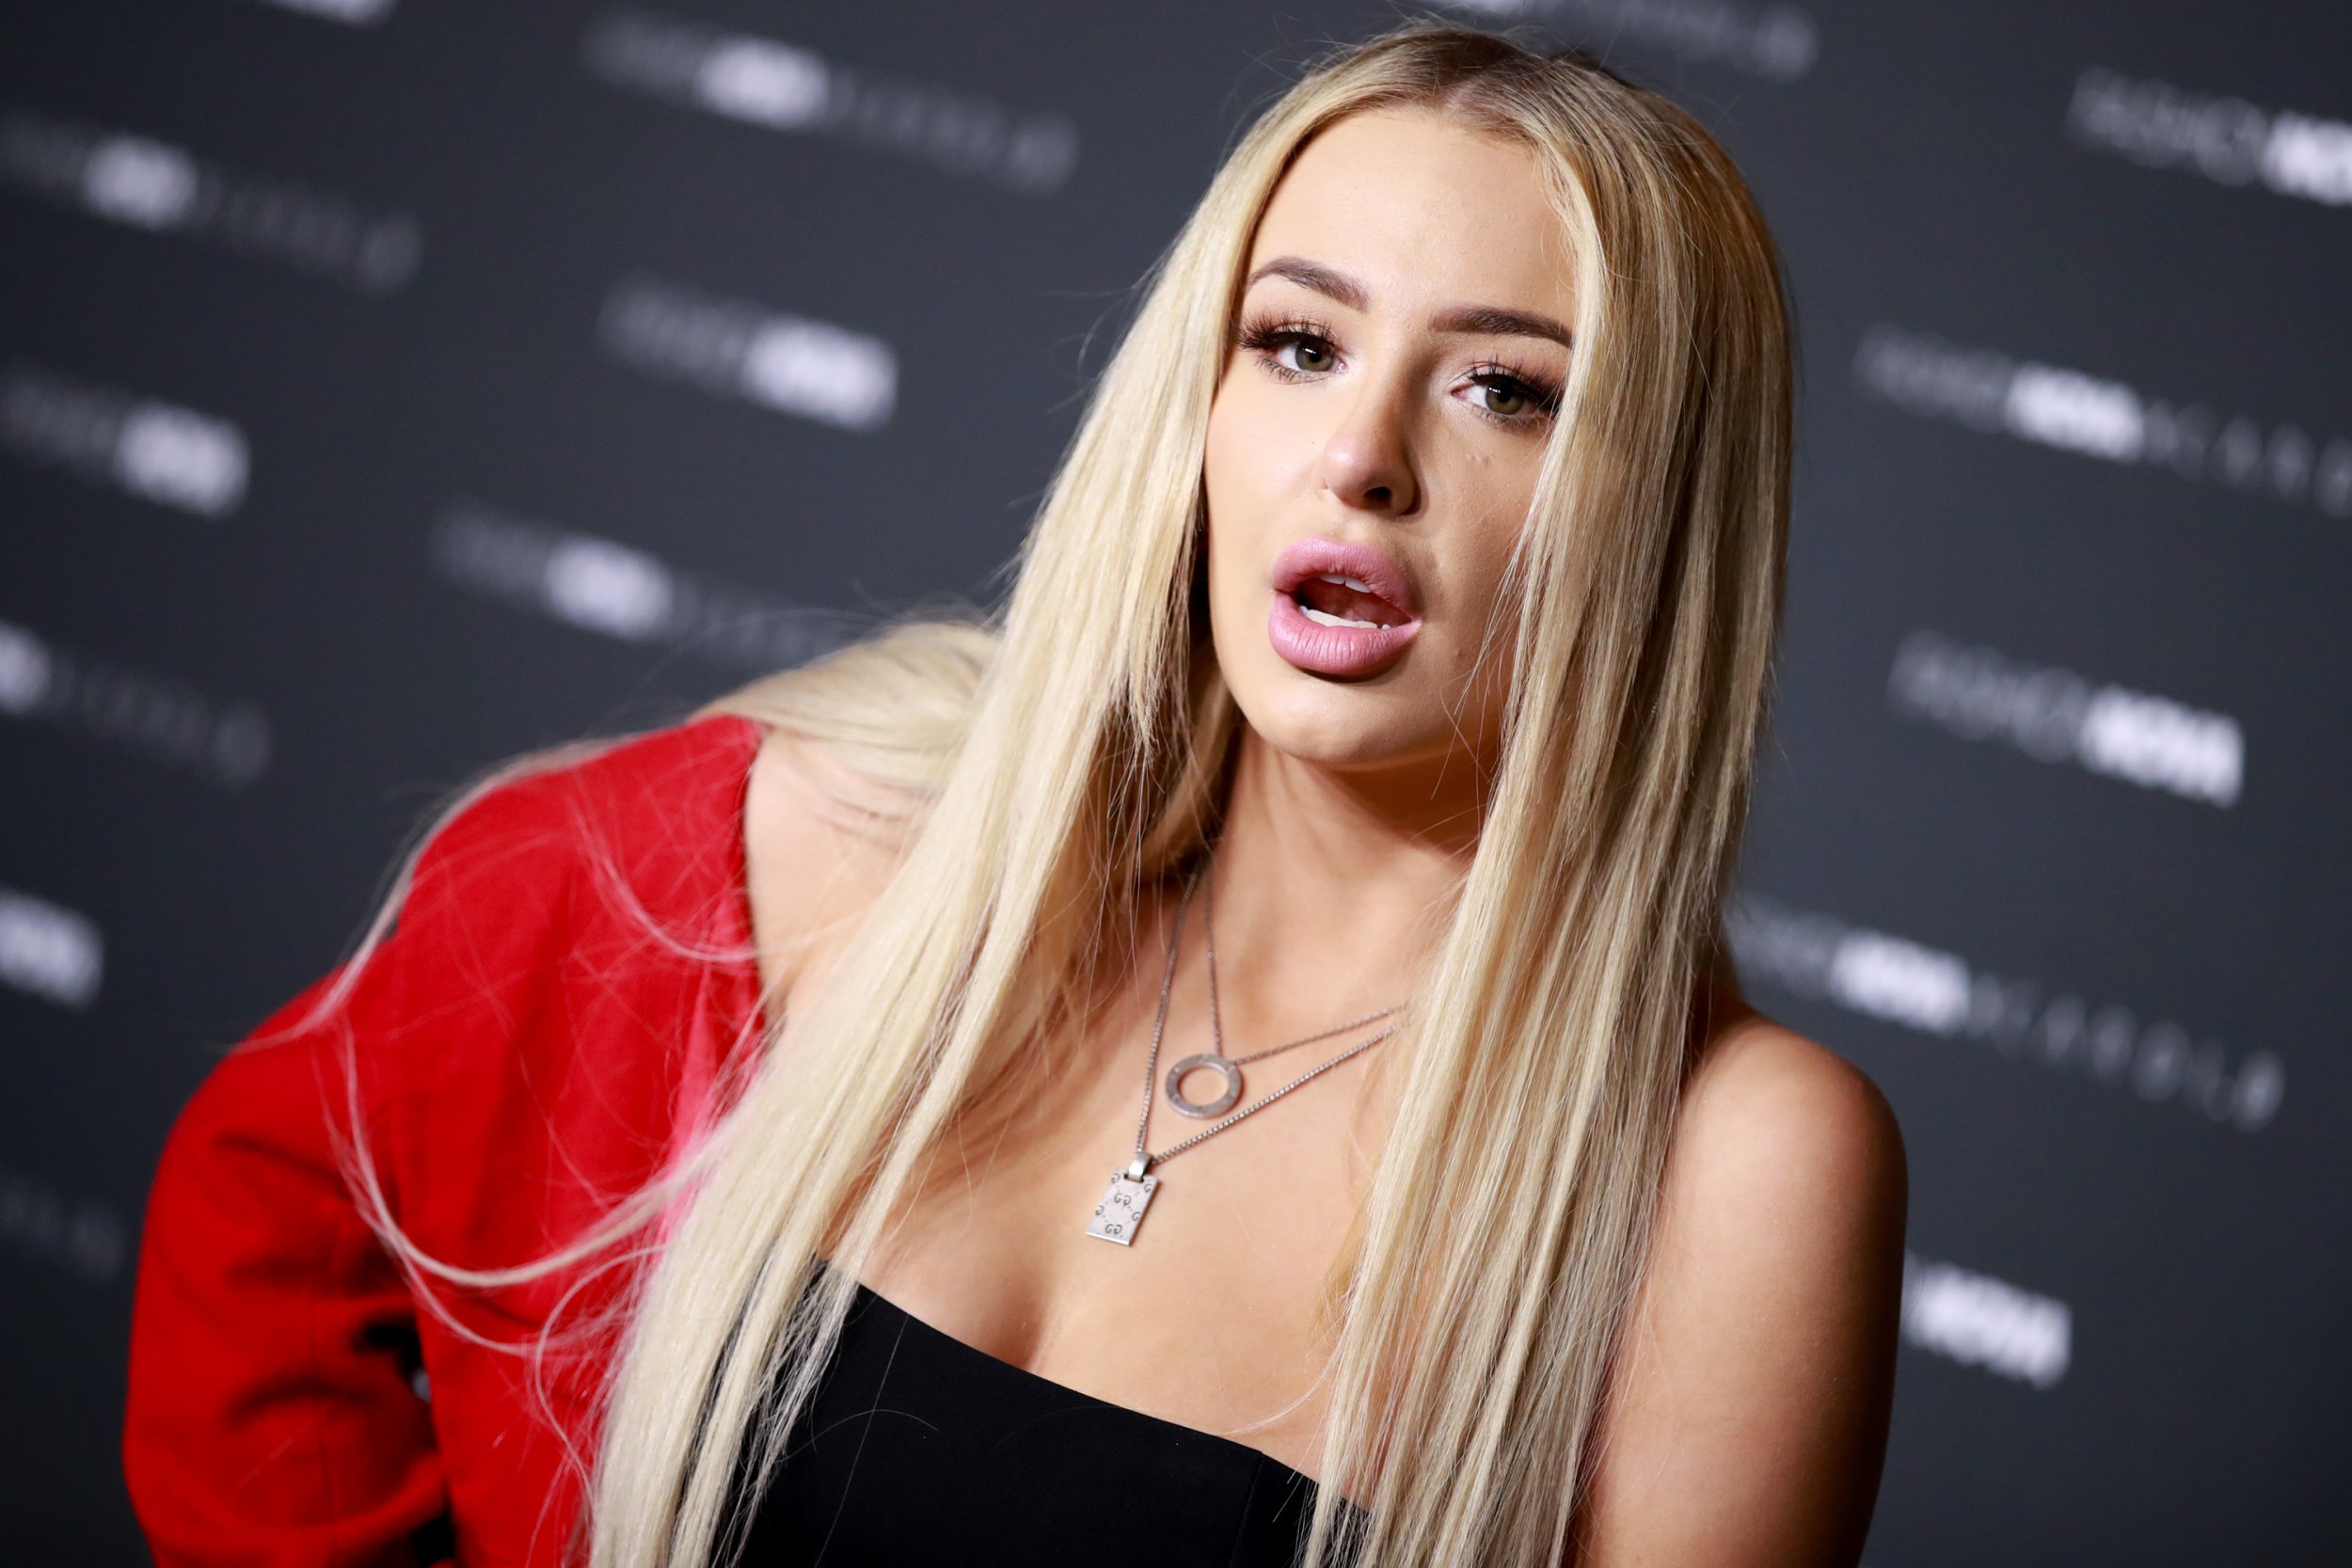 Tana Mongeau's YouTube show wasn't canceled over recent controver...